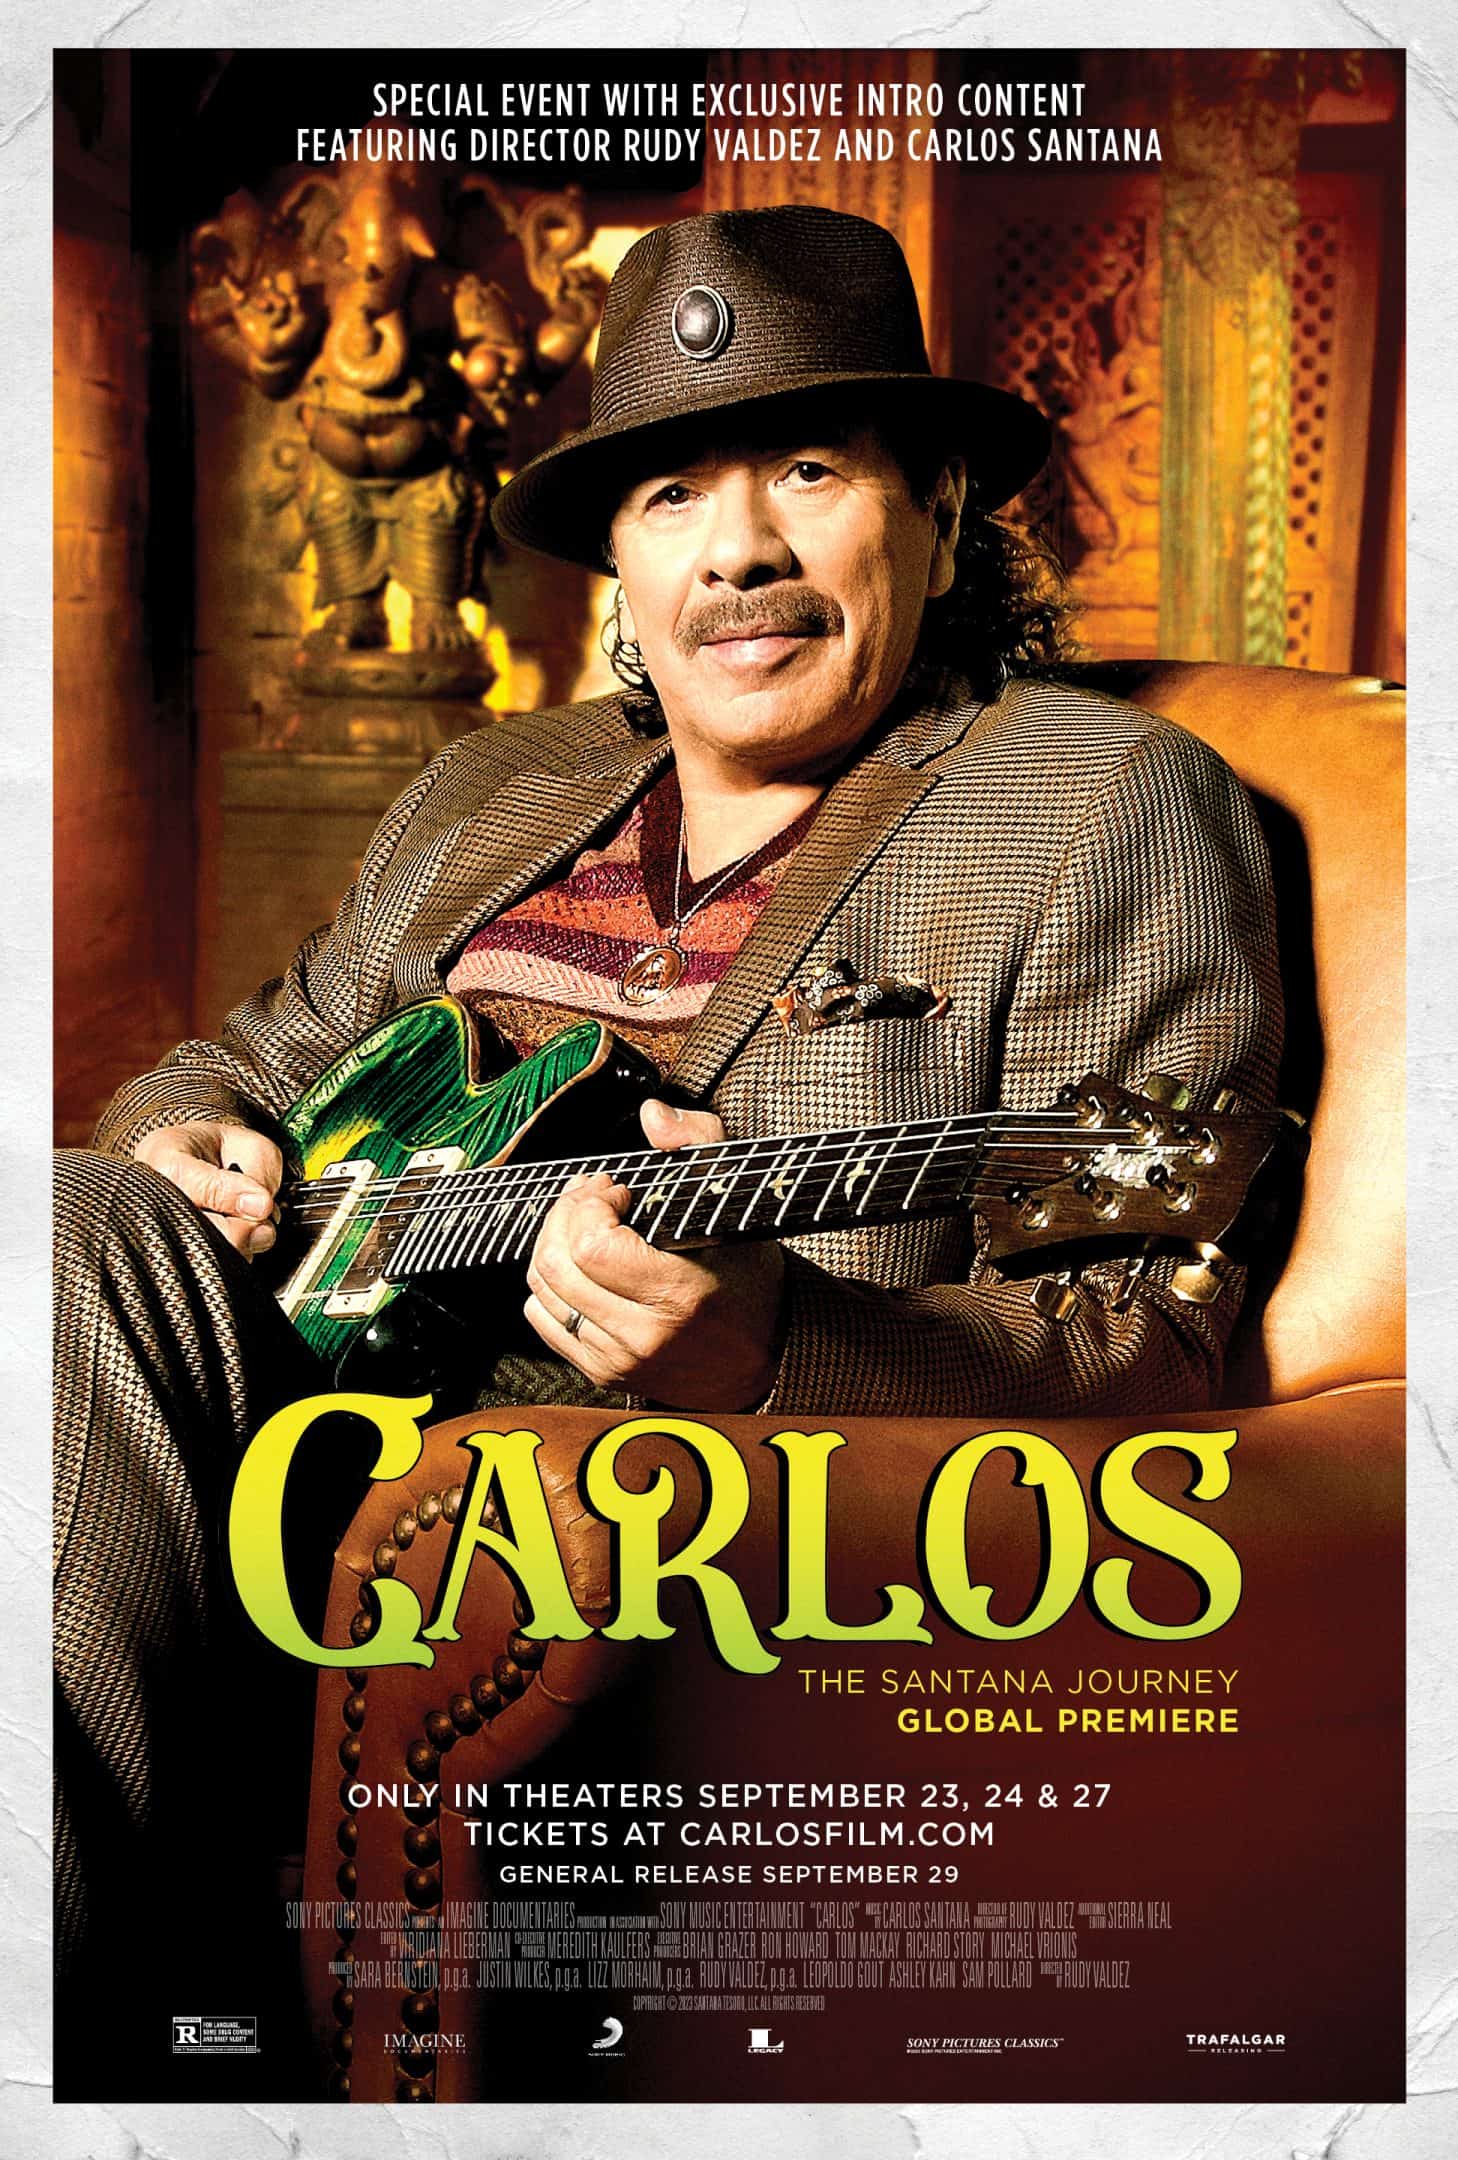 New Santana Documentary Carlos to Premiere in Theaters this September 1